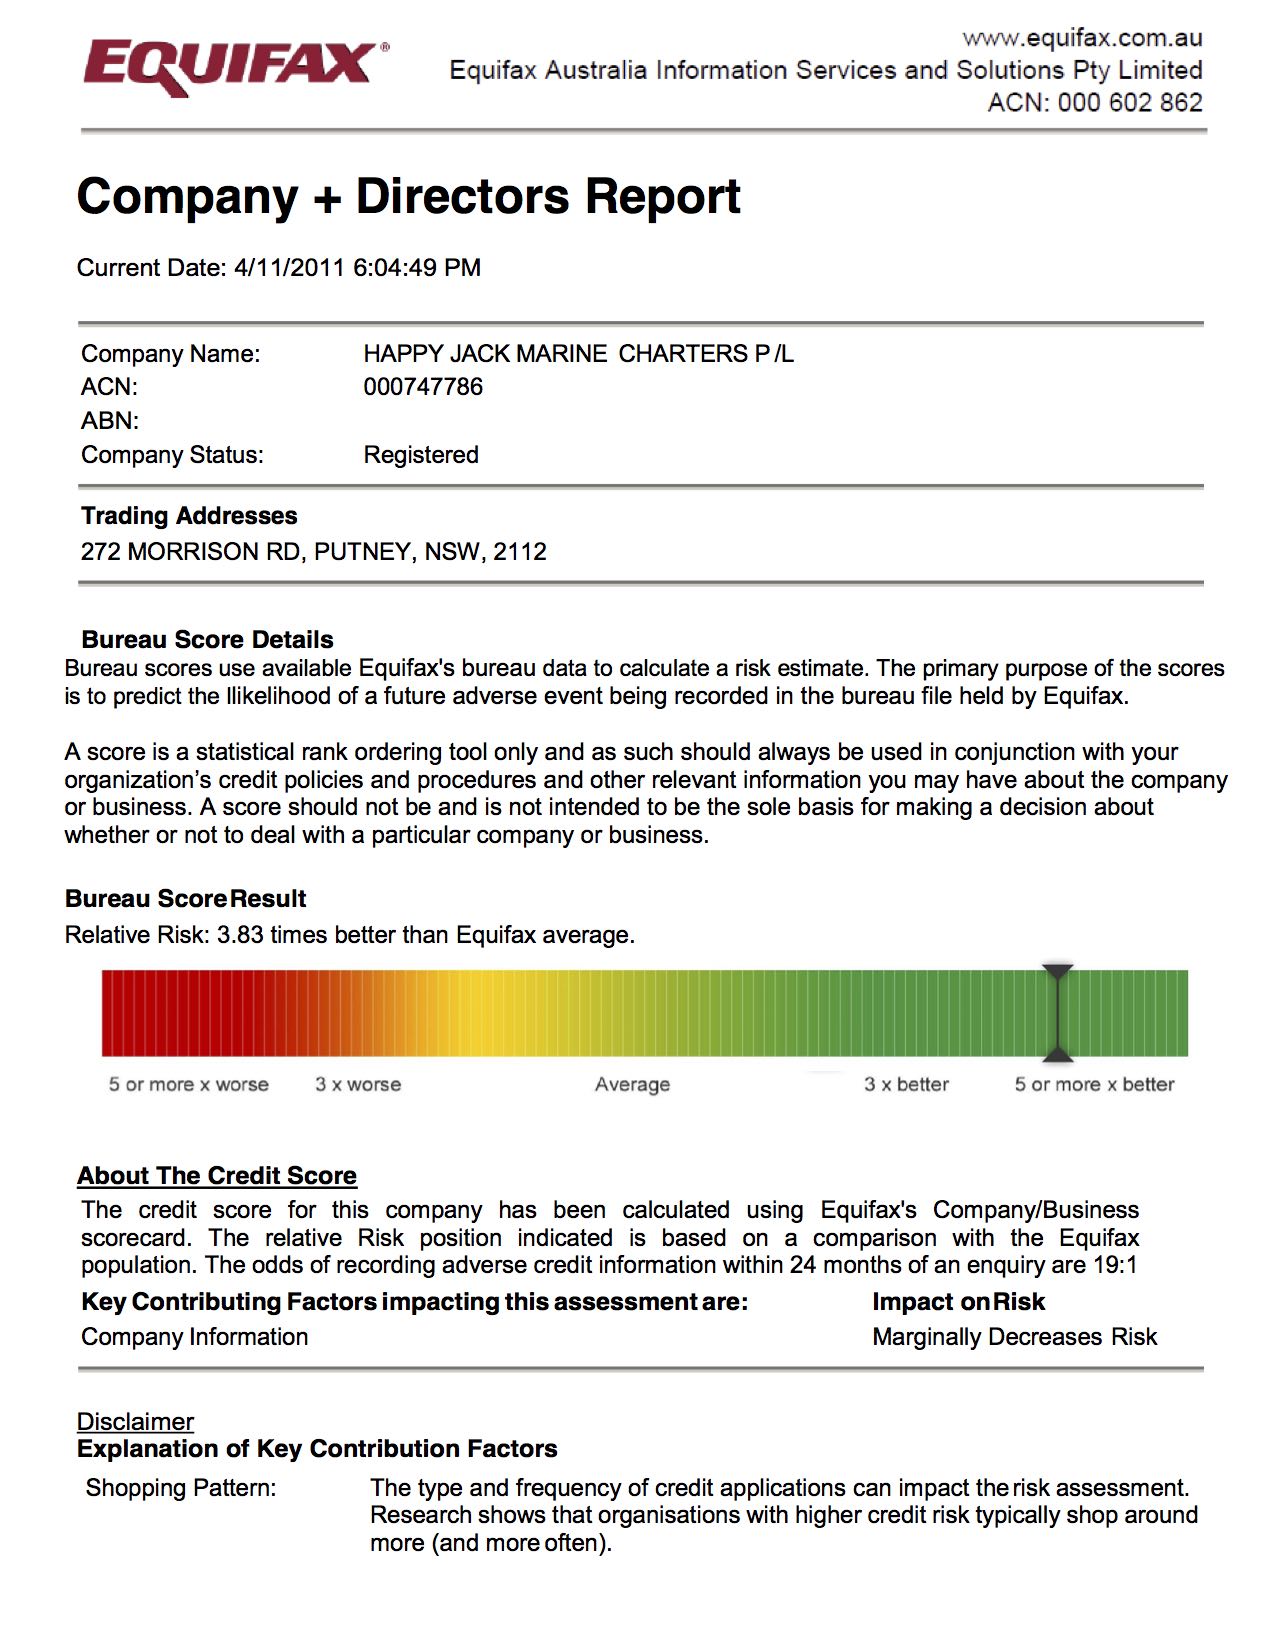 Credit Report - Company and Director